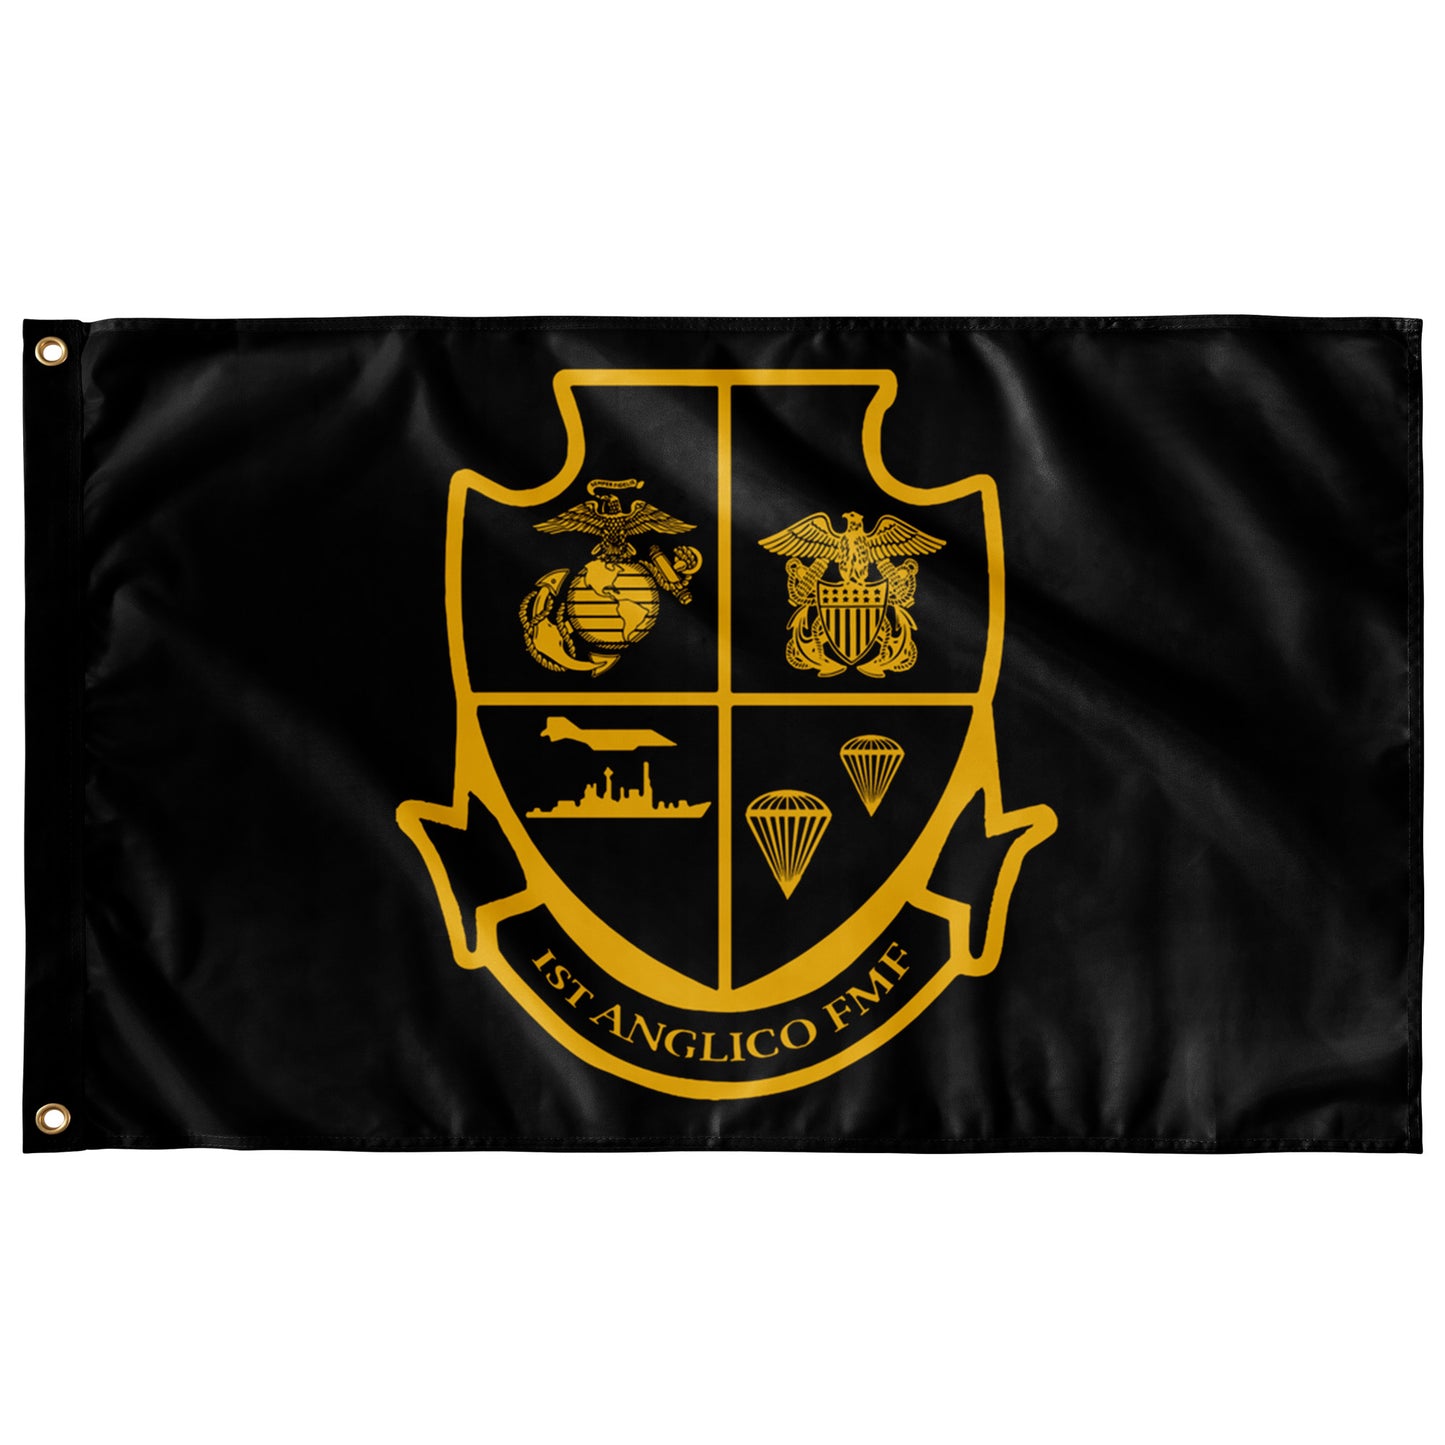 1st ANGLICO Crest Flag